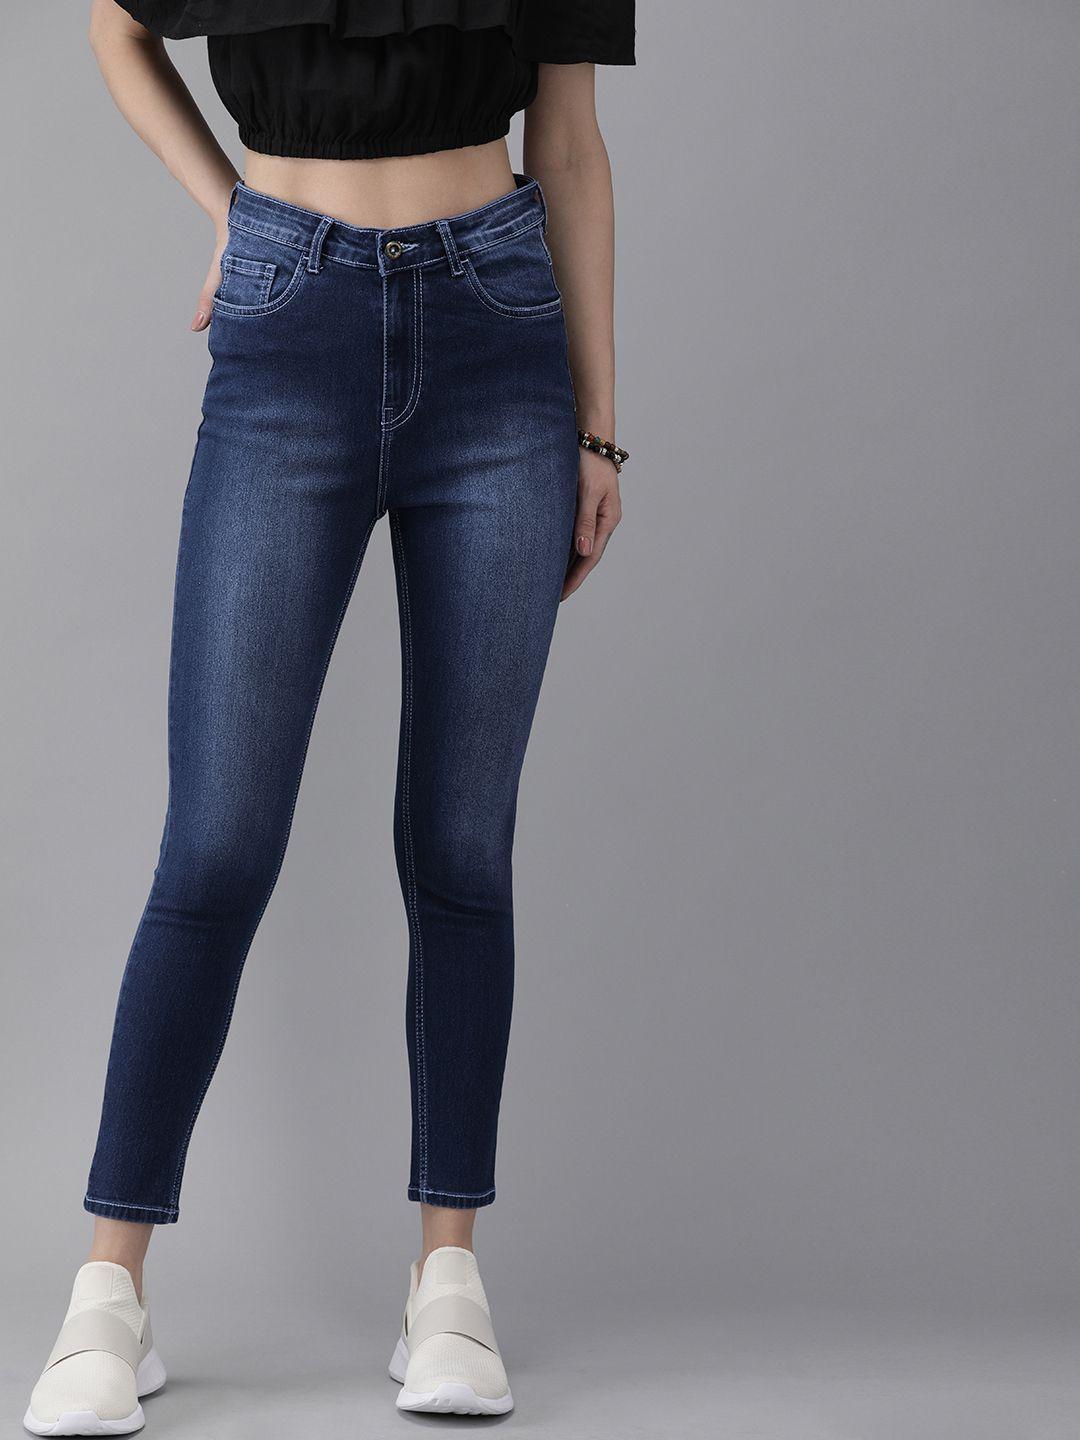 roadster-women-blue-super-skinny-fit-high-rise-clean-look-stretchable-jeans